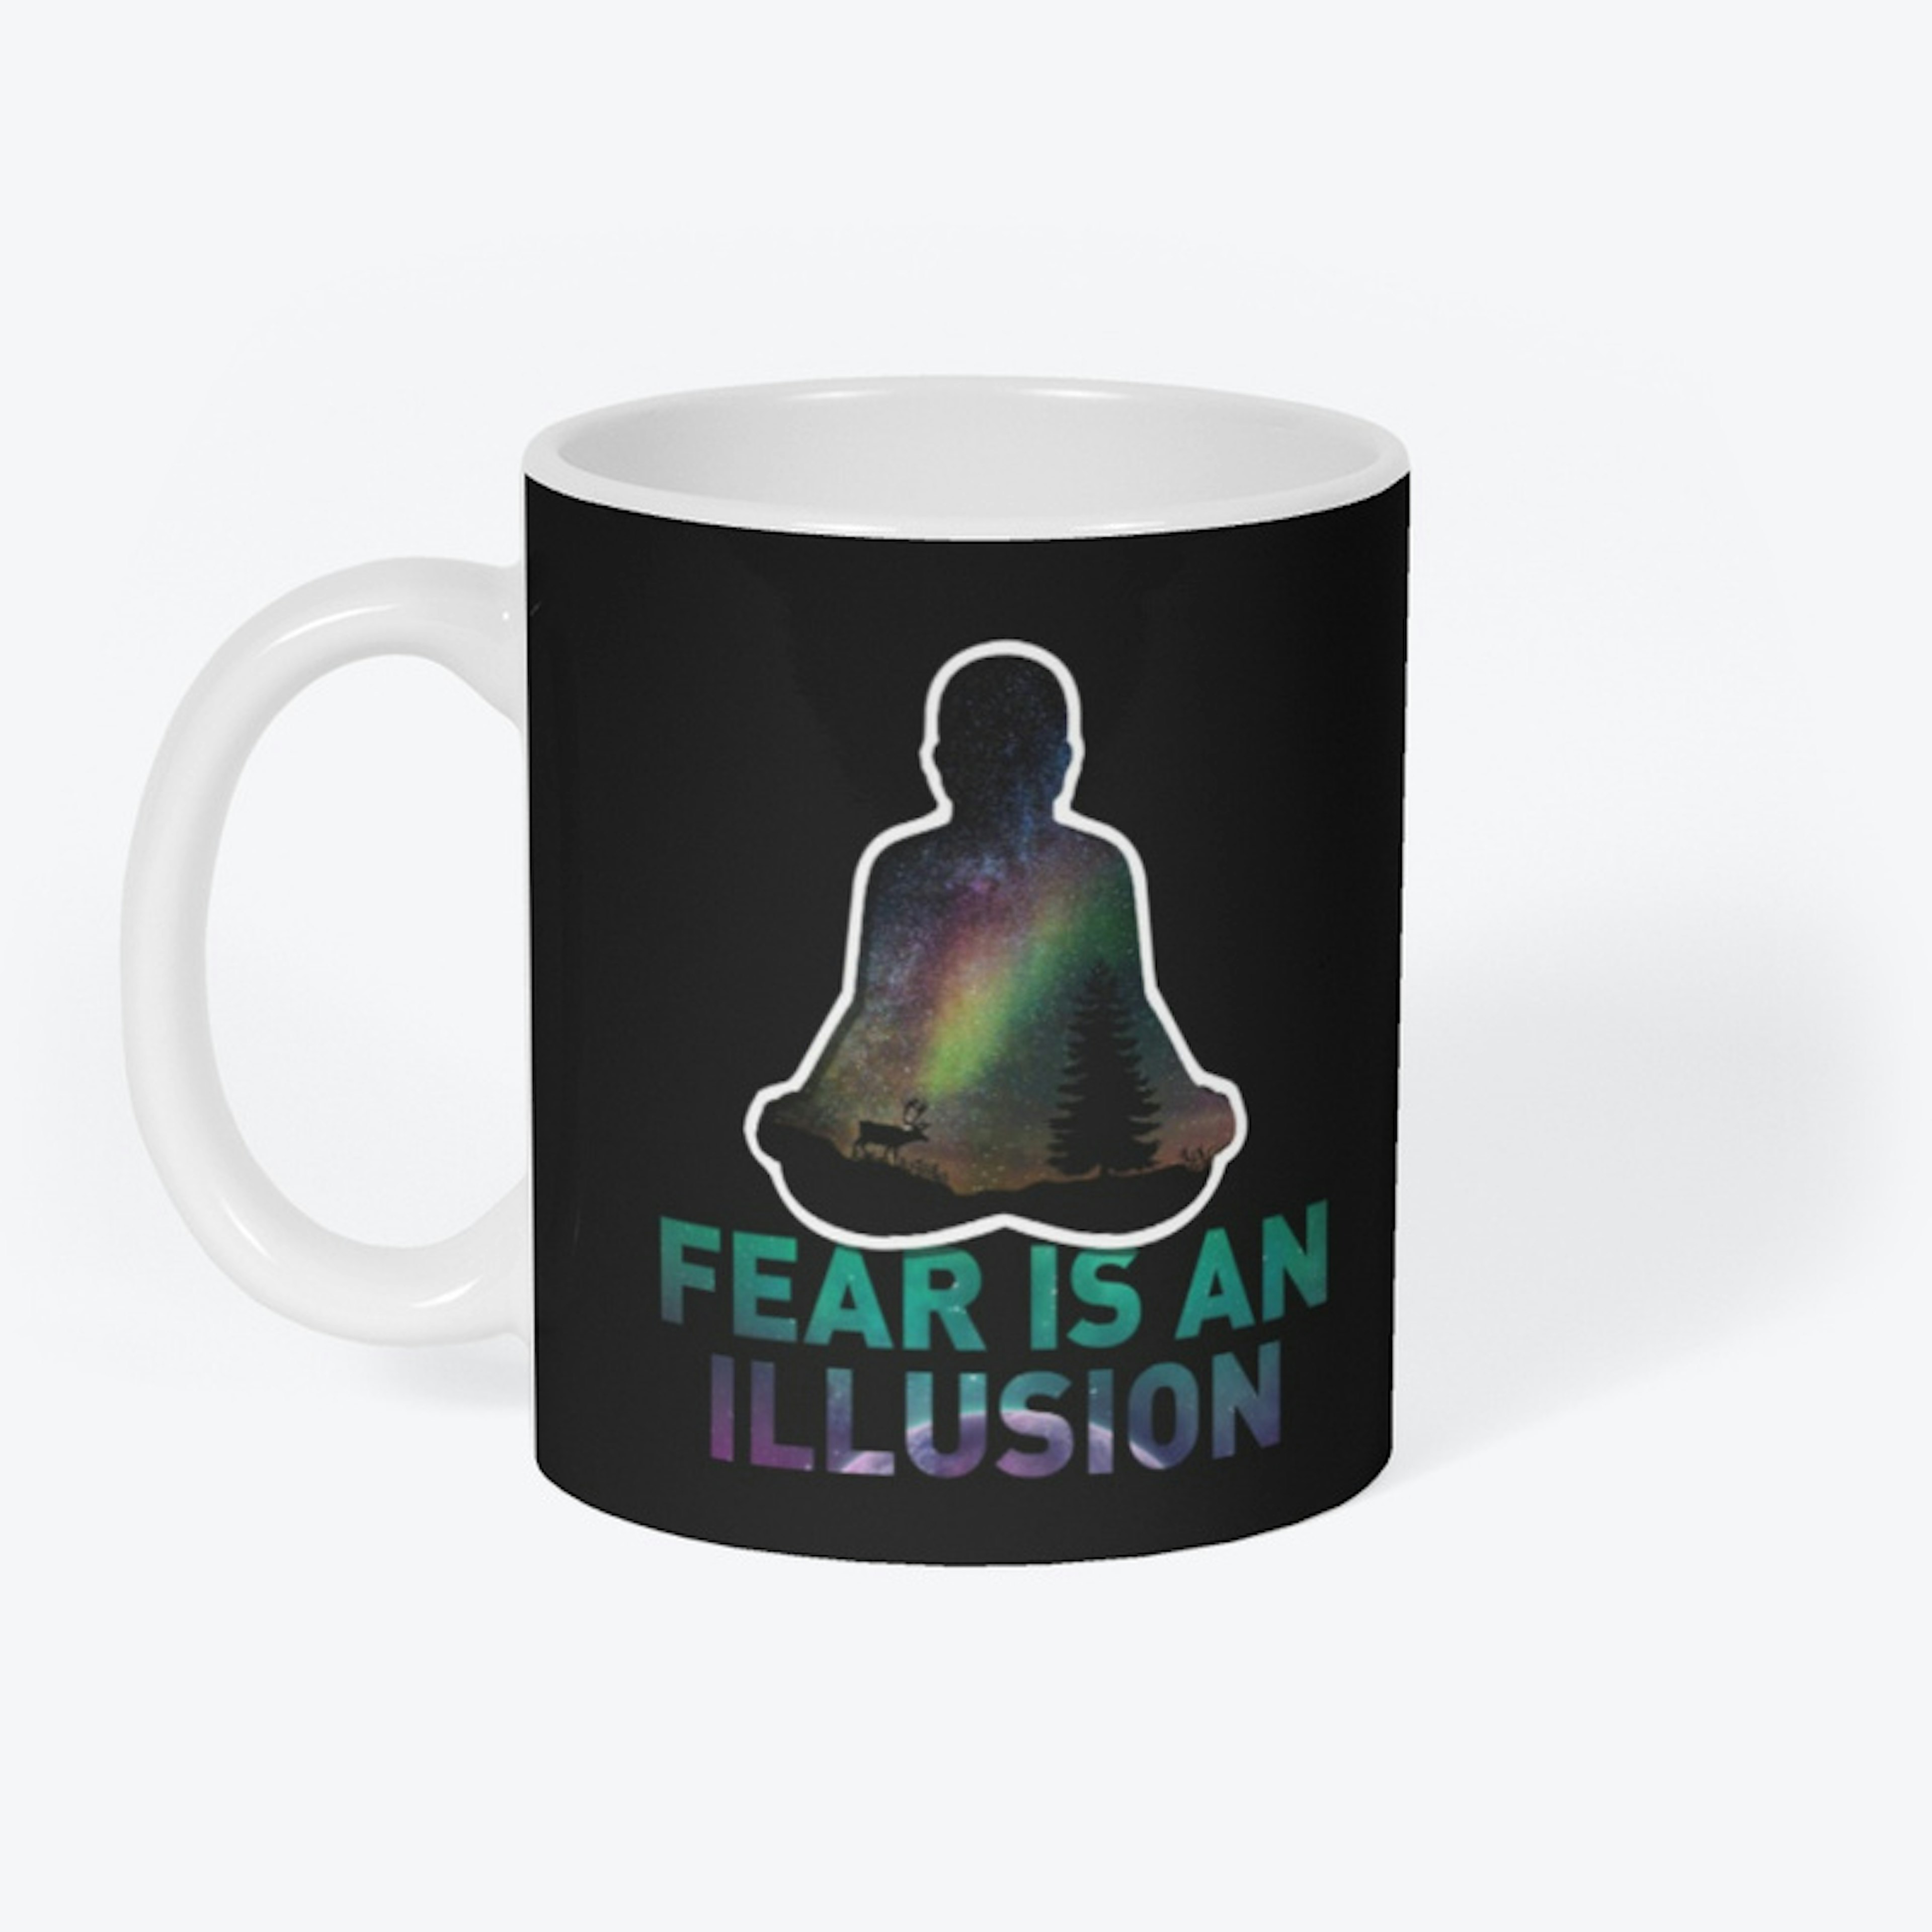 FEAR IS AN ILLUSION